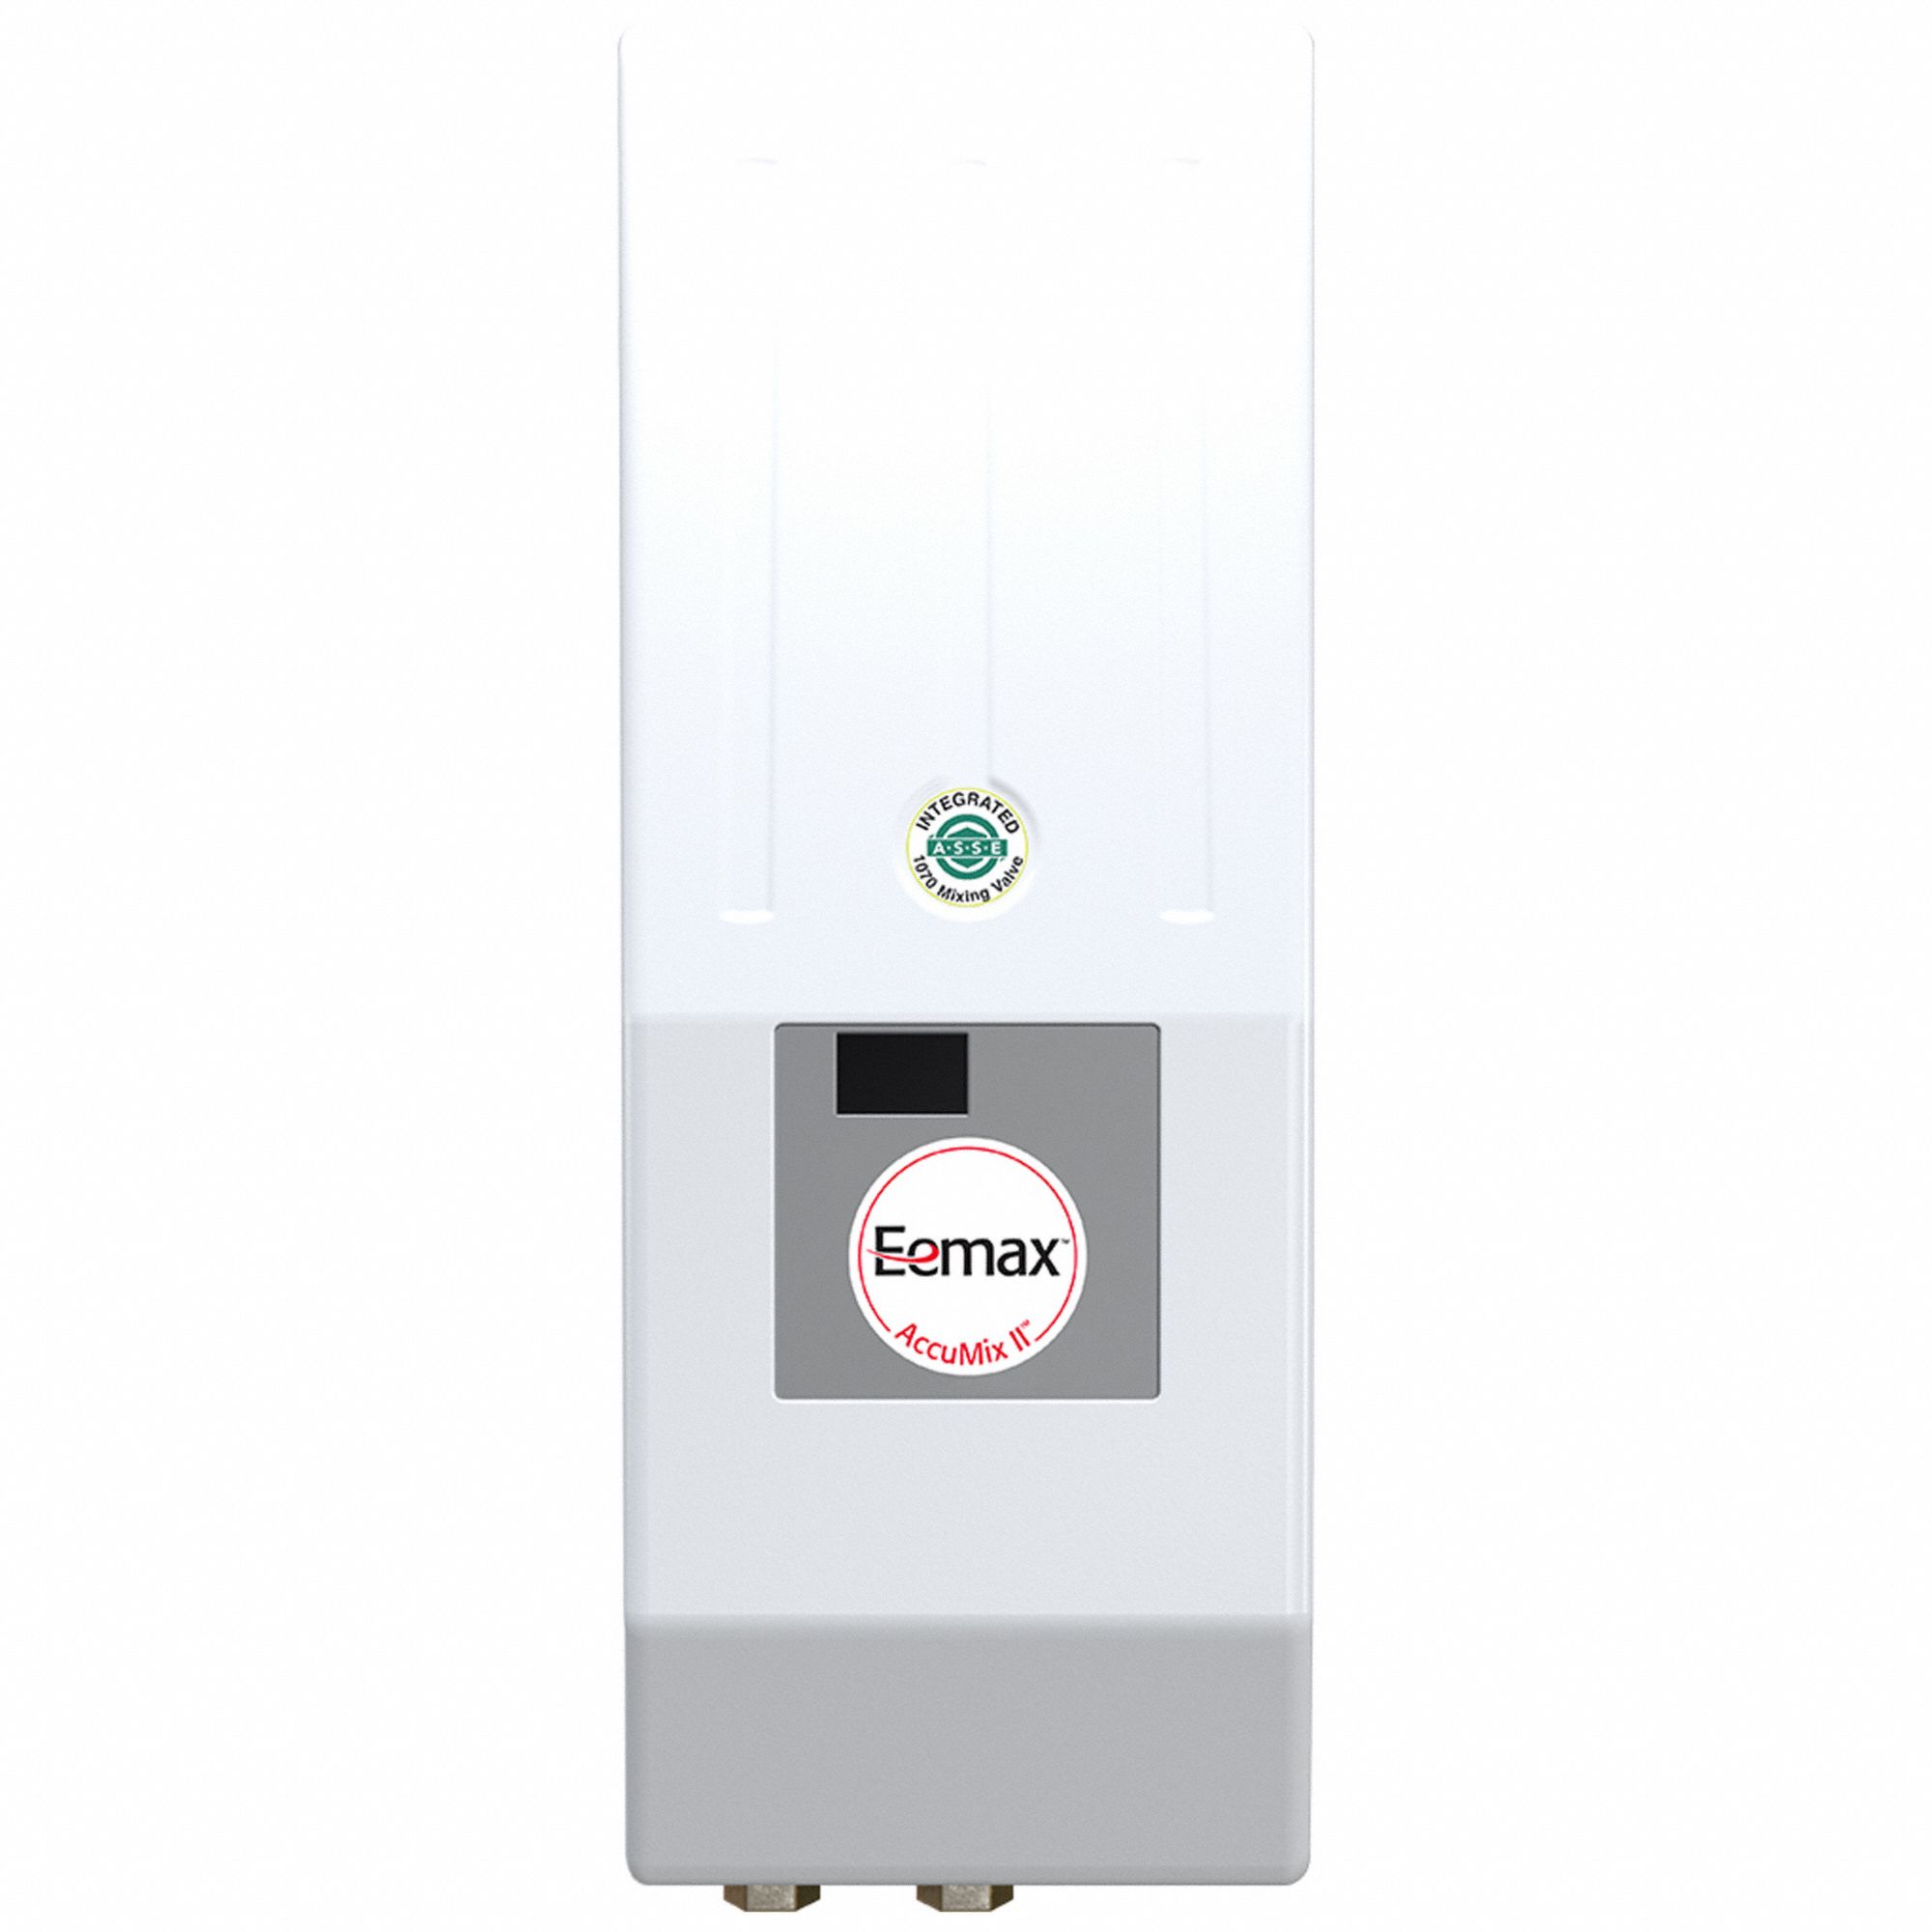 EEMAX AM010240T Electric Tankless Water Heater240V